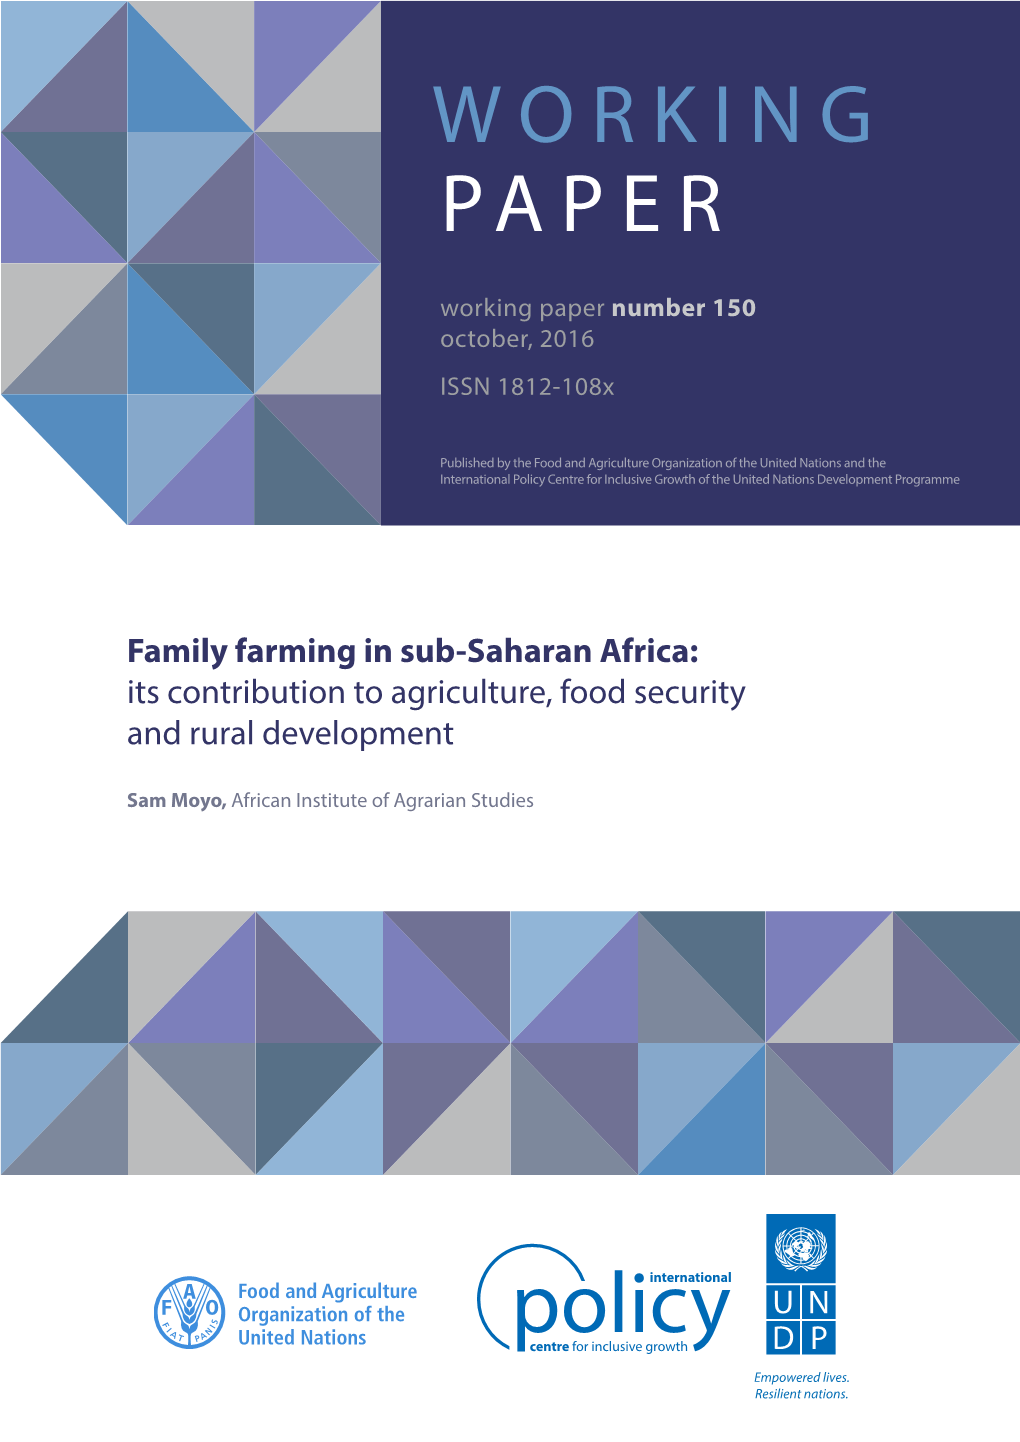 Family Farming in Sub-Saharan Africa: Its Contribution to Agriculture, Food Security and Rural Development